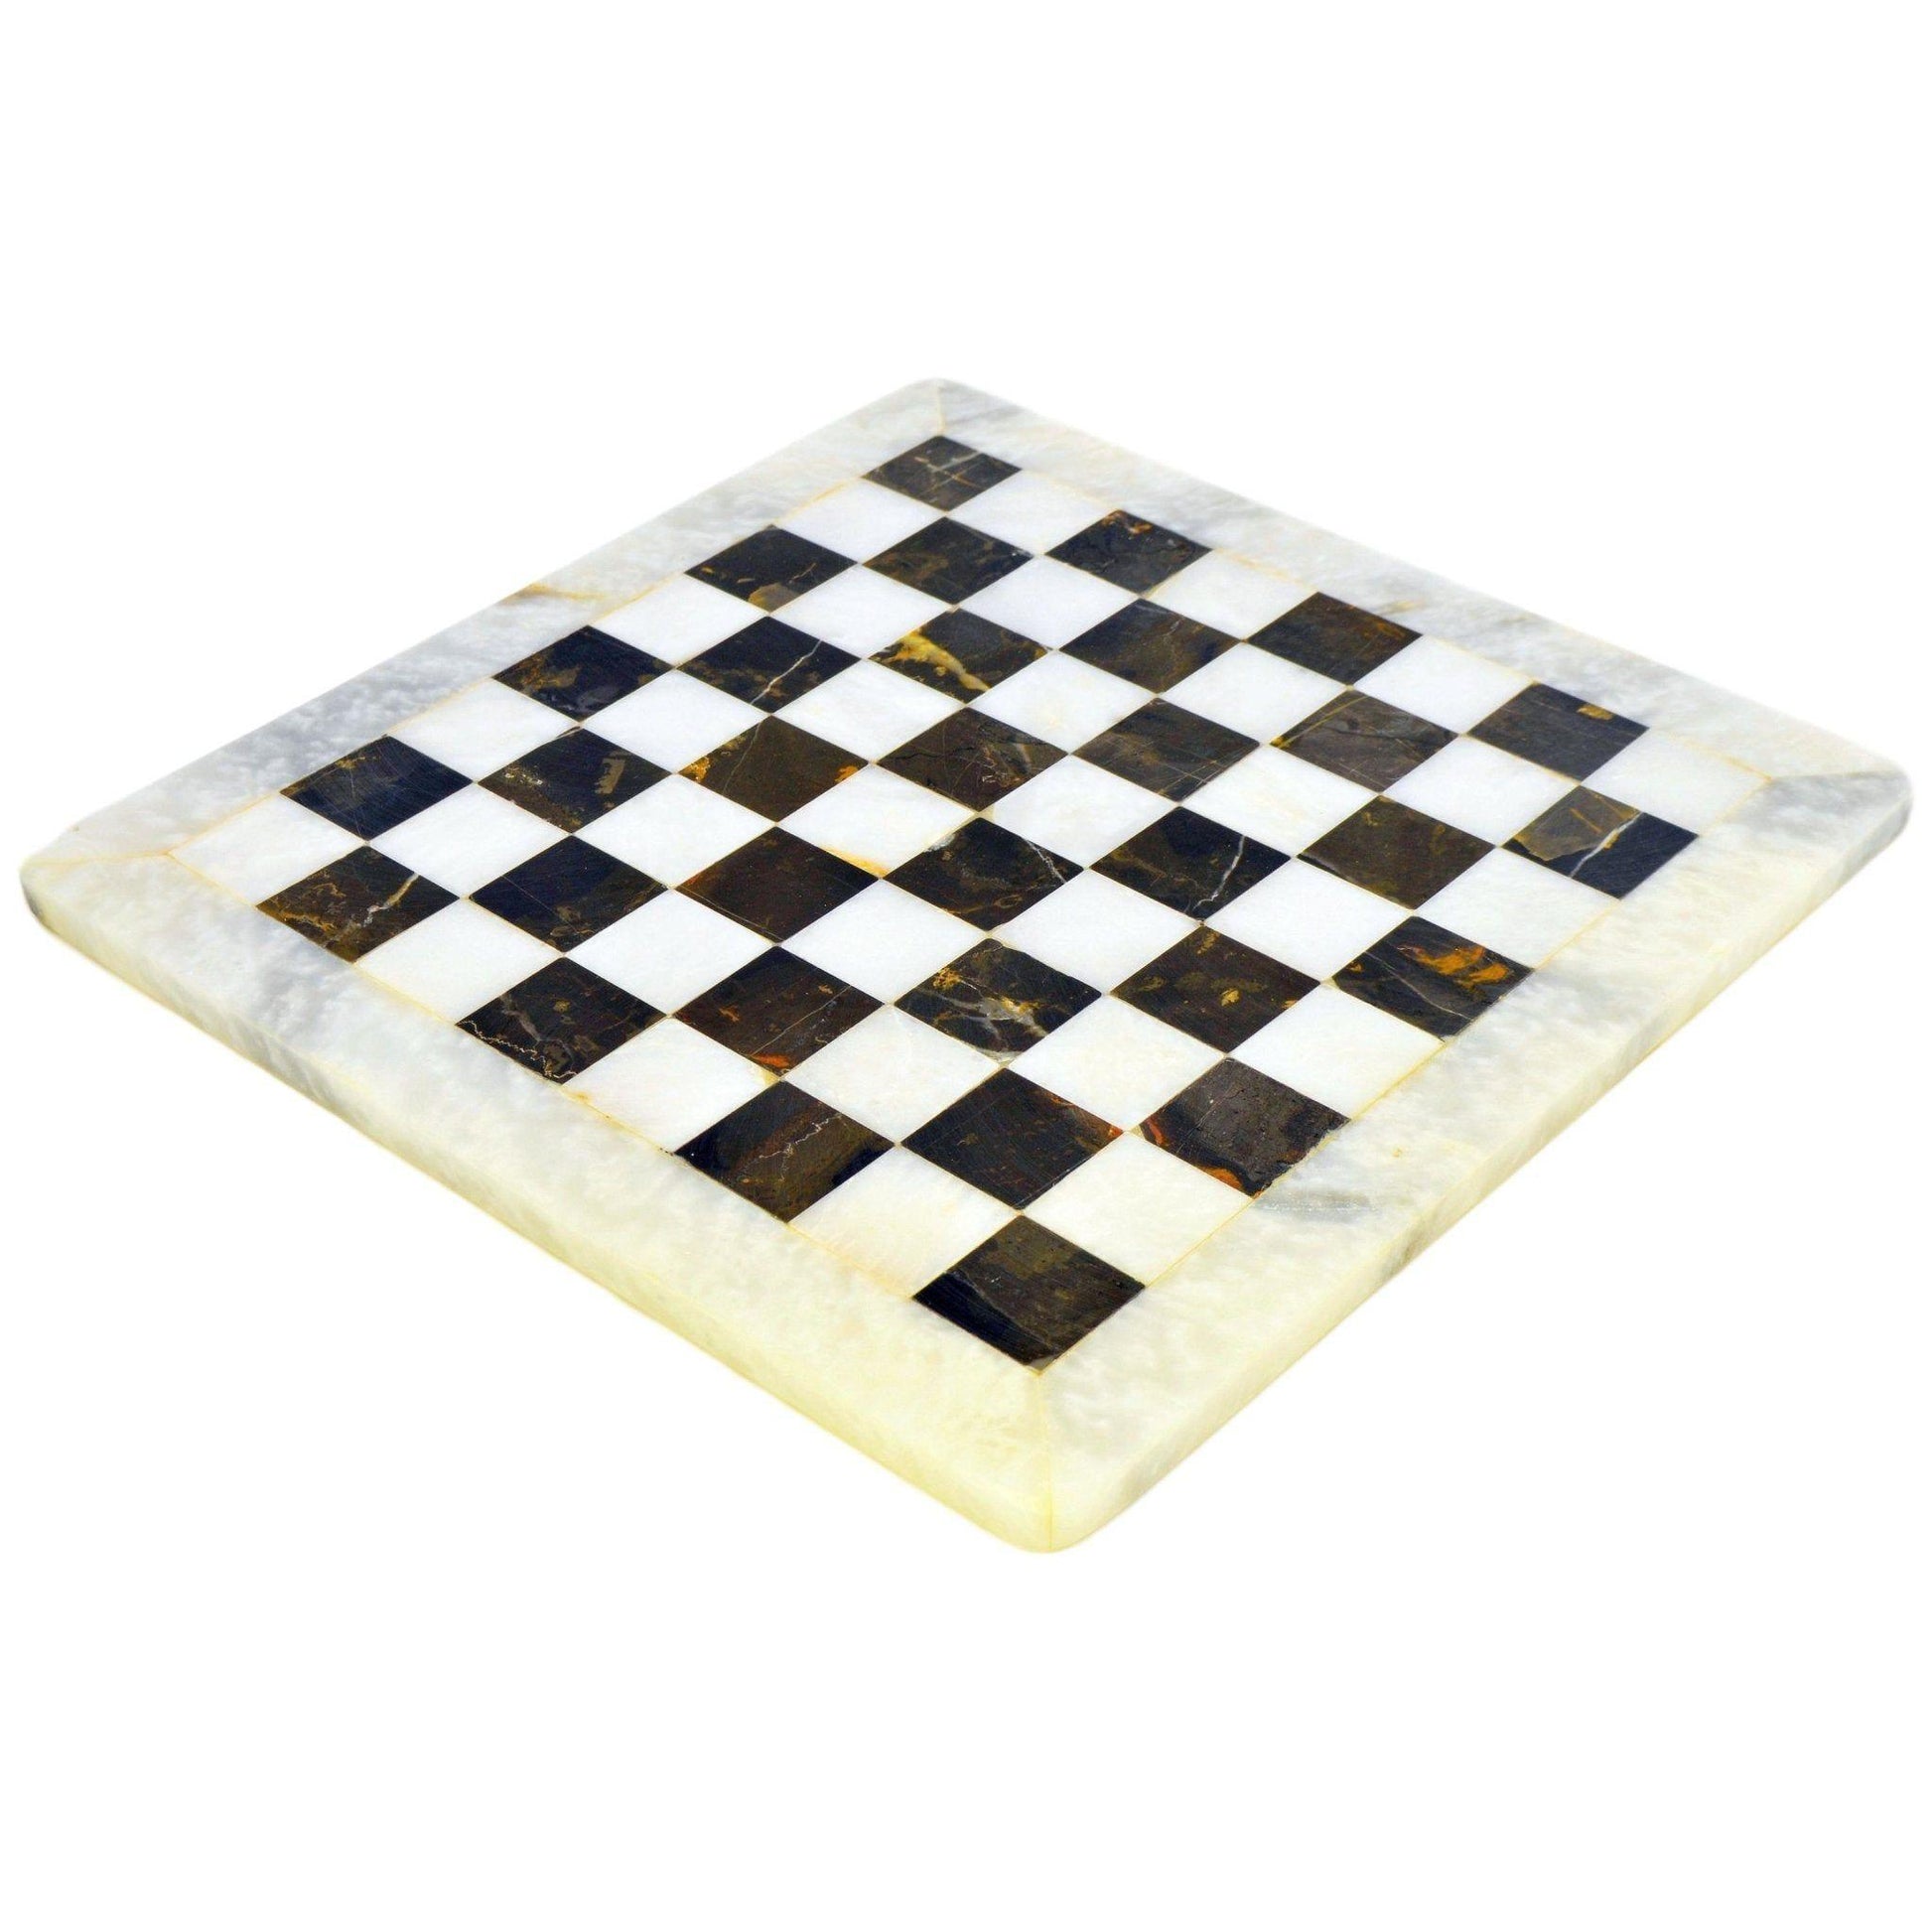 Luxury Chess Set in Michelangelo and White Marble - Nature Home Decor